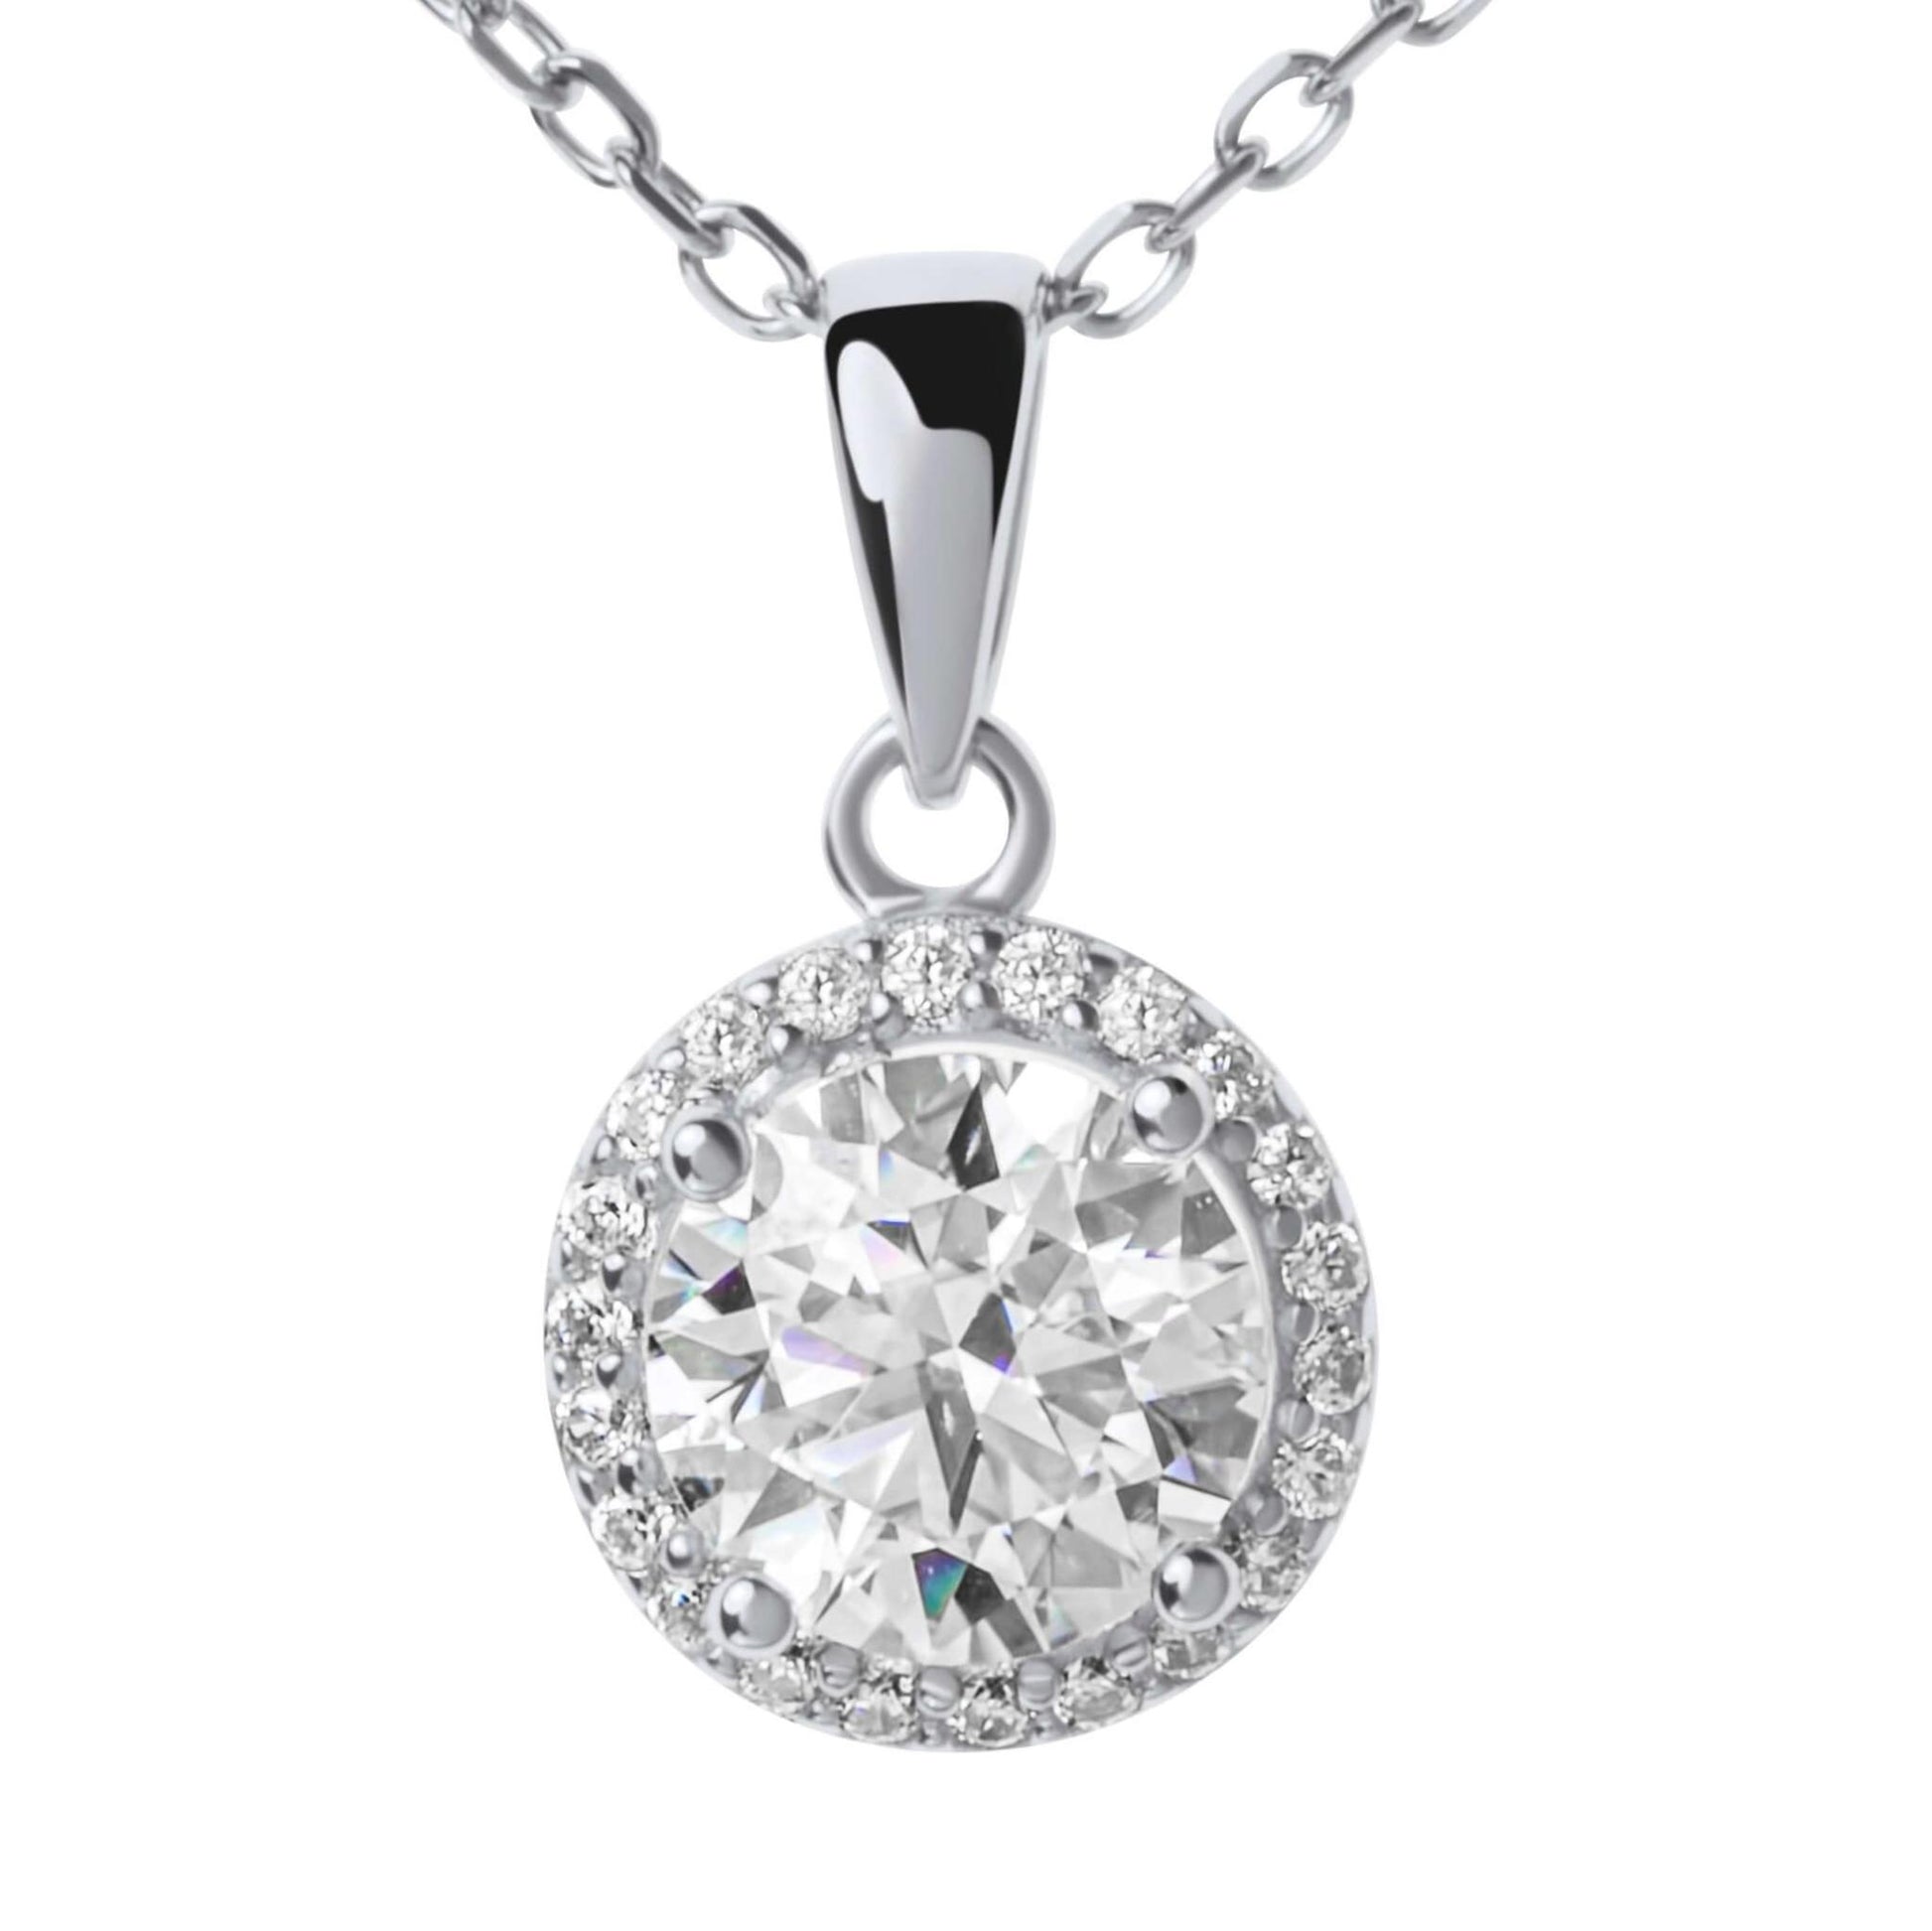 Moissanite Diamond Silver Necklace with Surrounding small stones